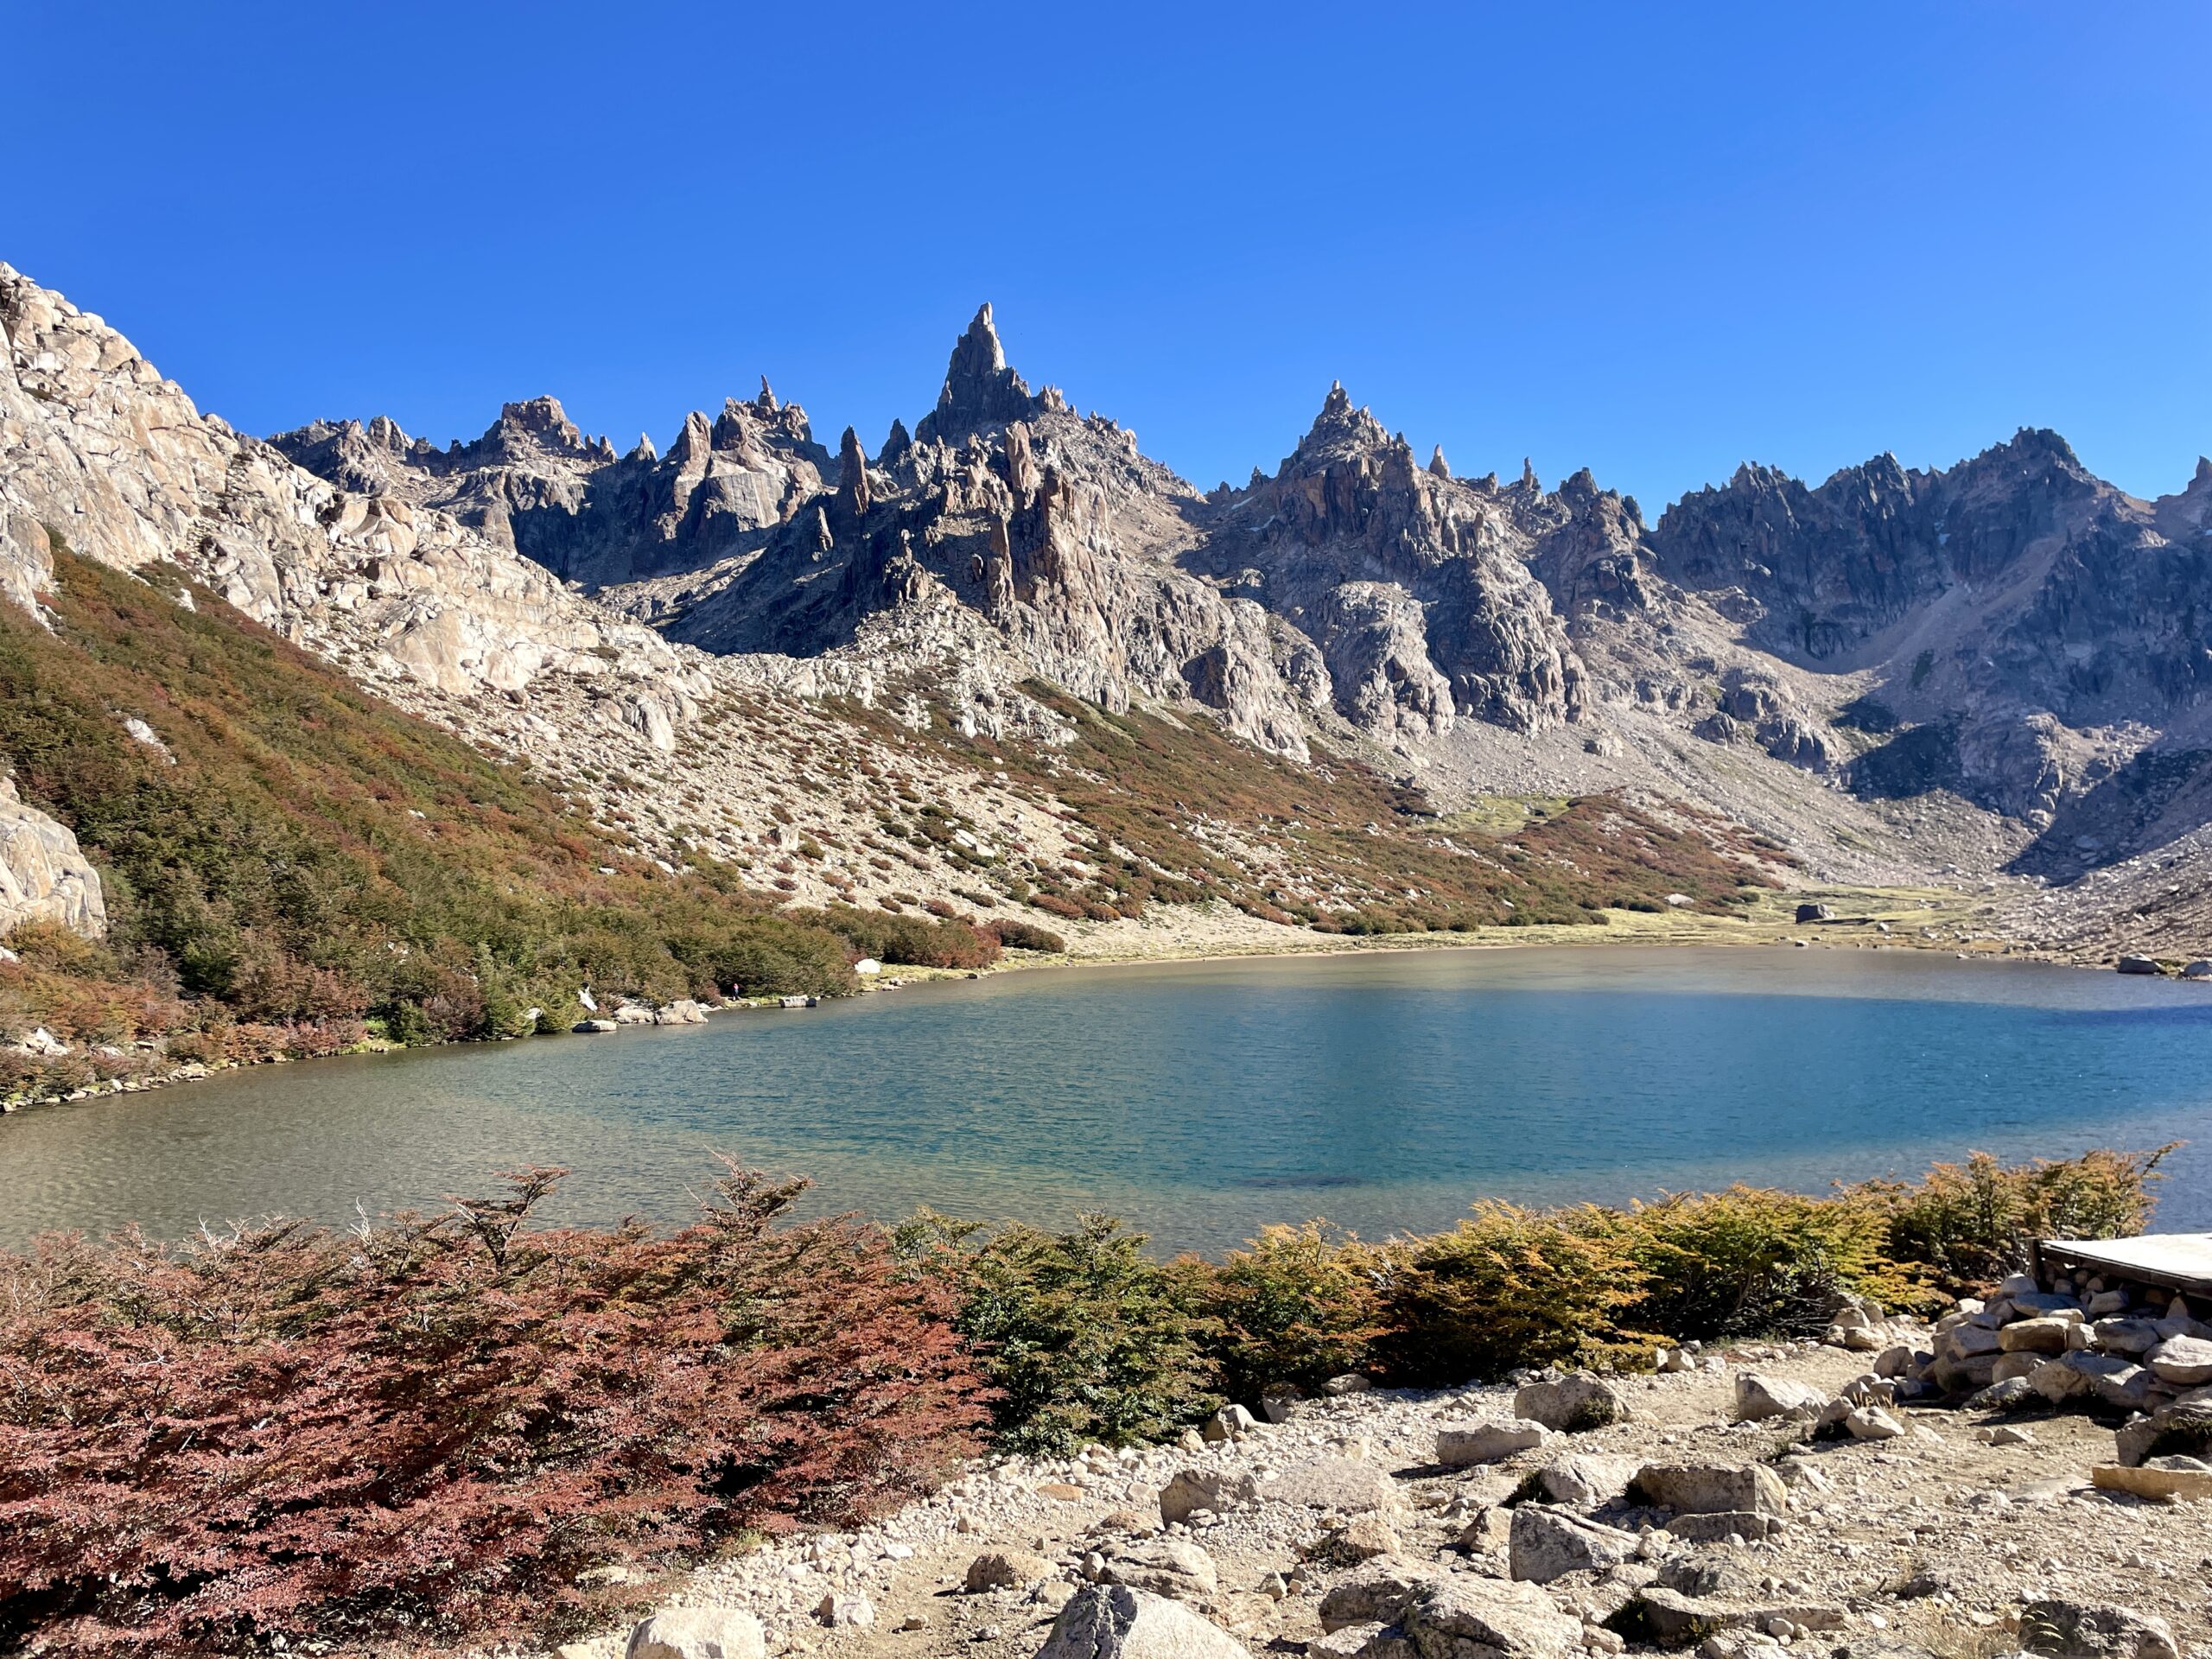 Hiking to Refugio Frey: Your Complete Guide